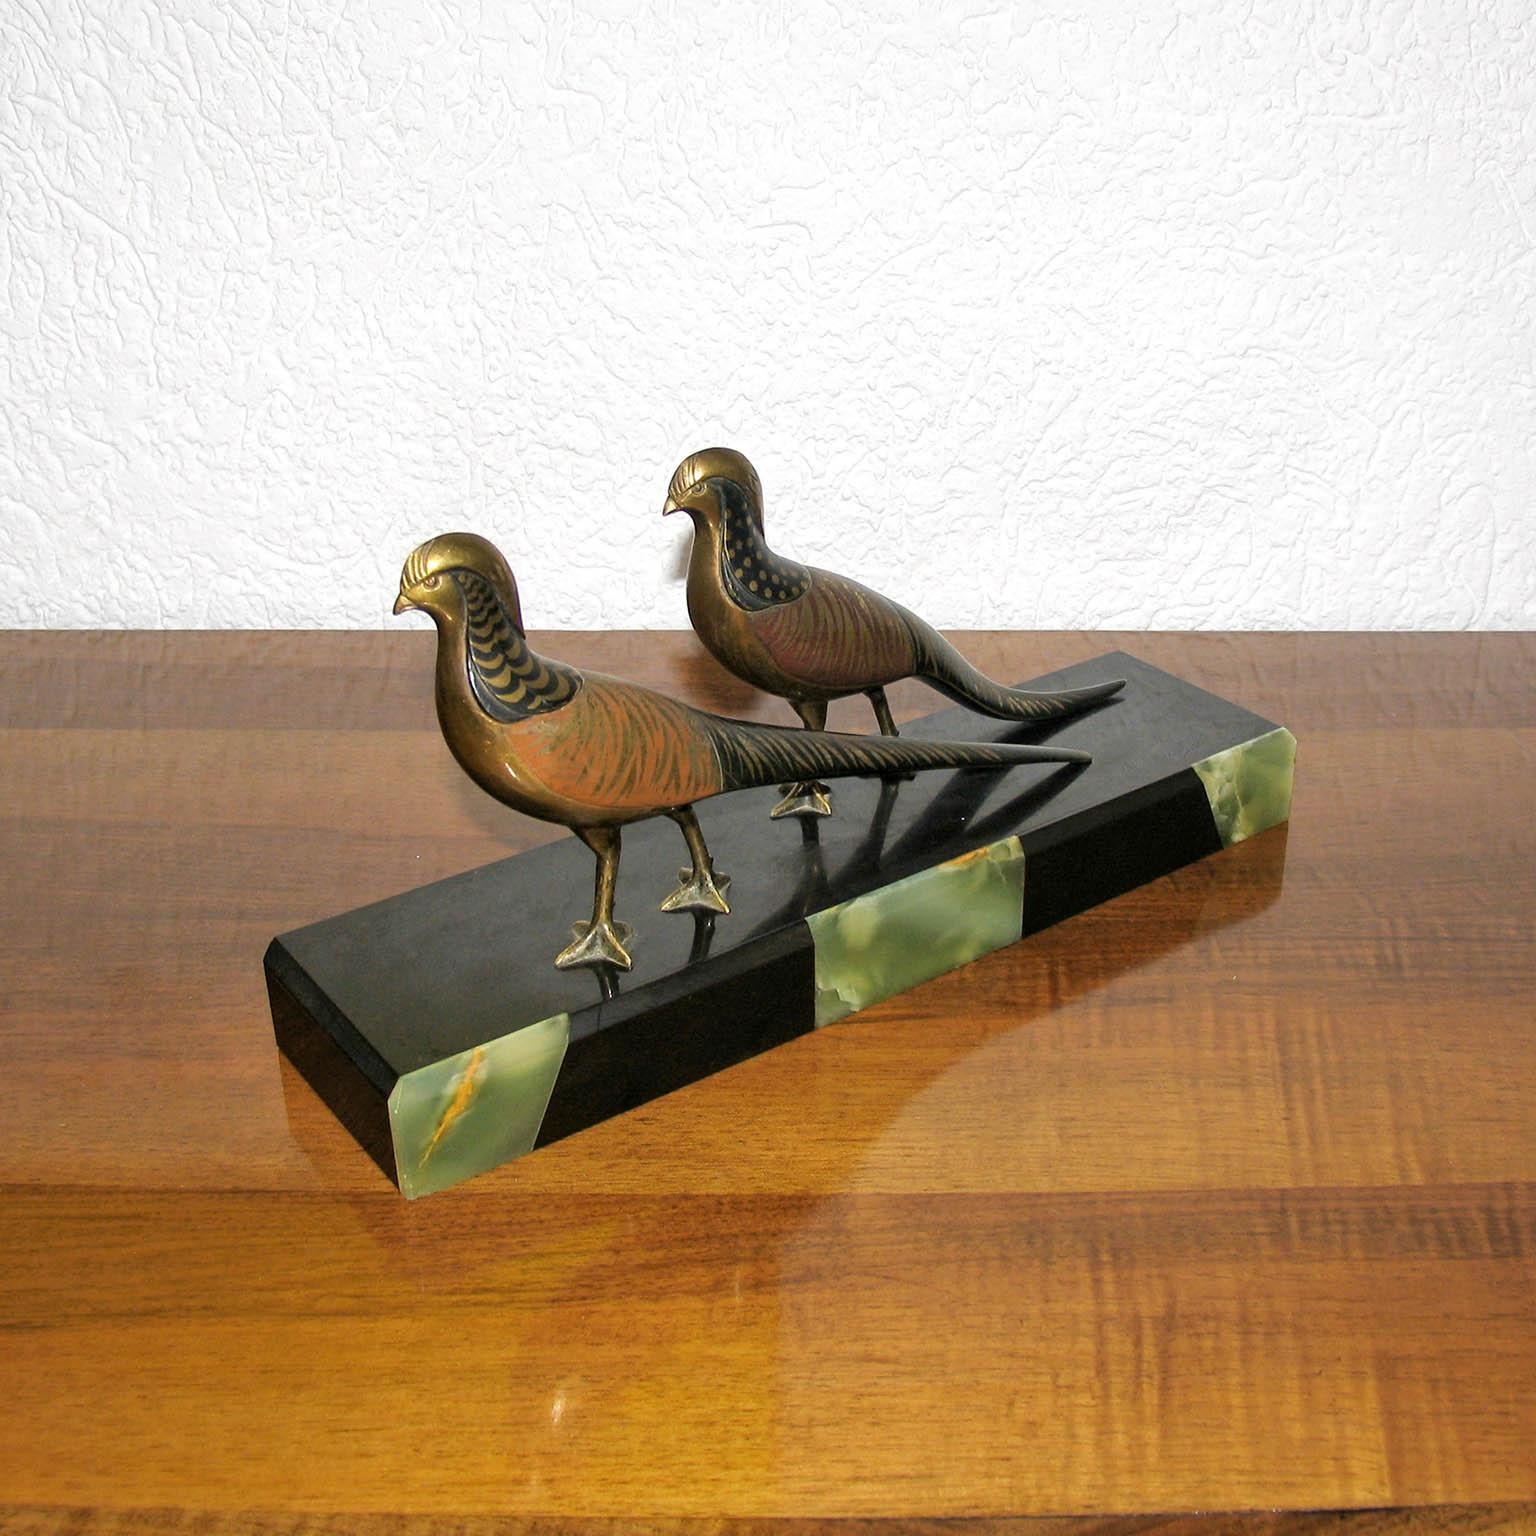 An exquisite original Art Deco sculpture depicting a pair of walking pheasants, by M.Secondo, France, circa 1925.
Multi-color cold painted bronze, with liquid gold accents, mounted on a marble and onyx base. Signed to the base, and each bird on the